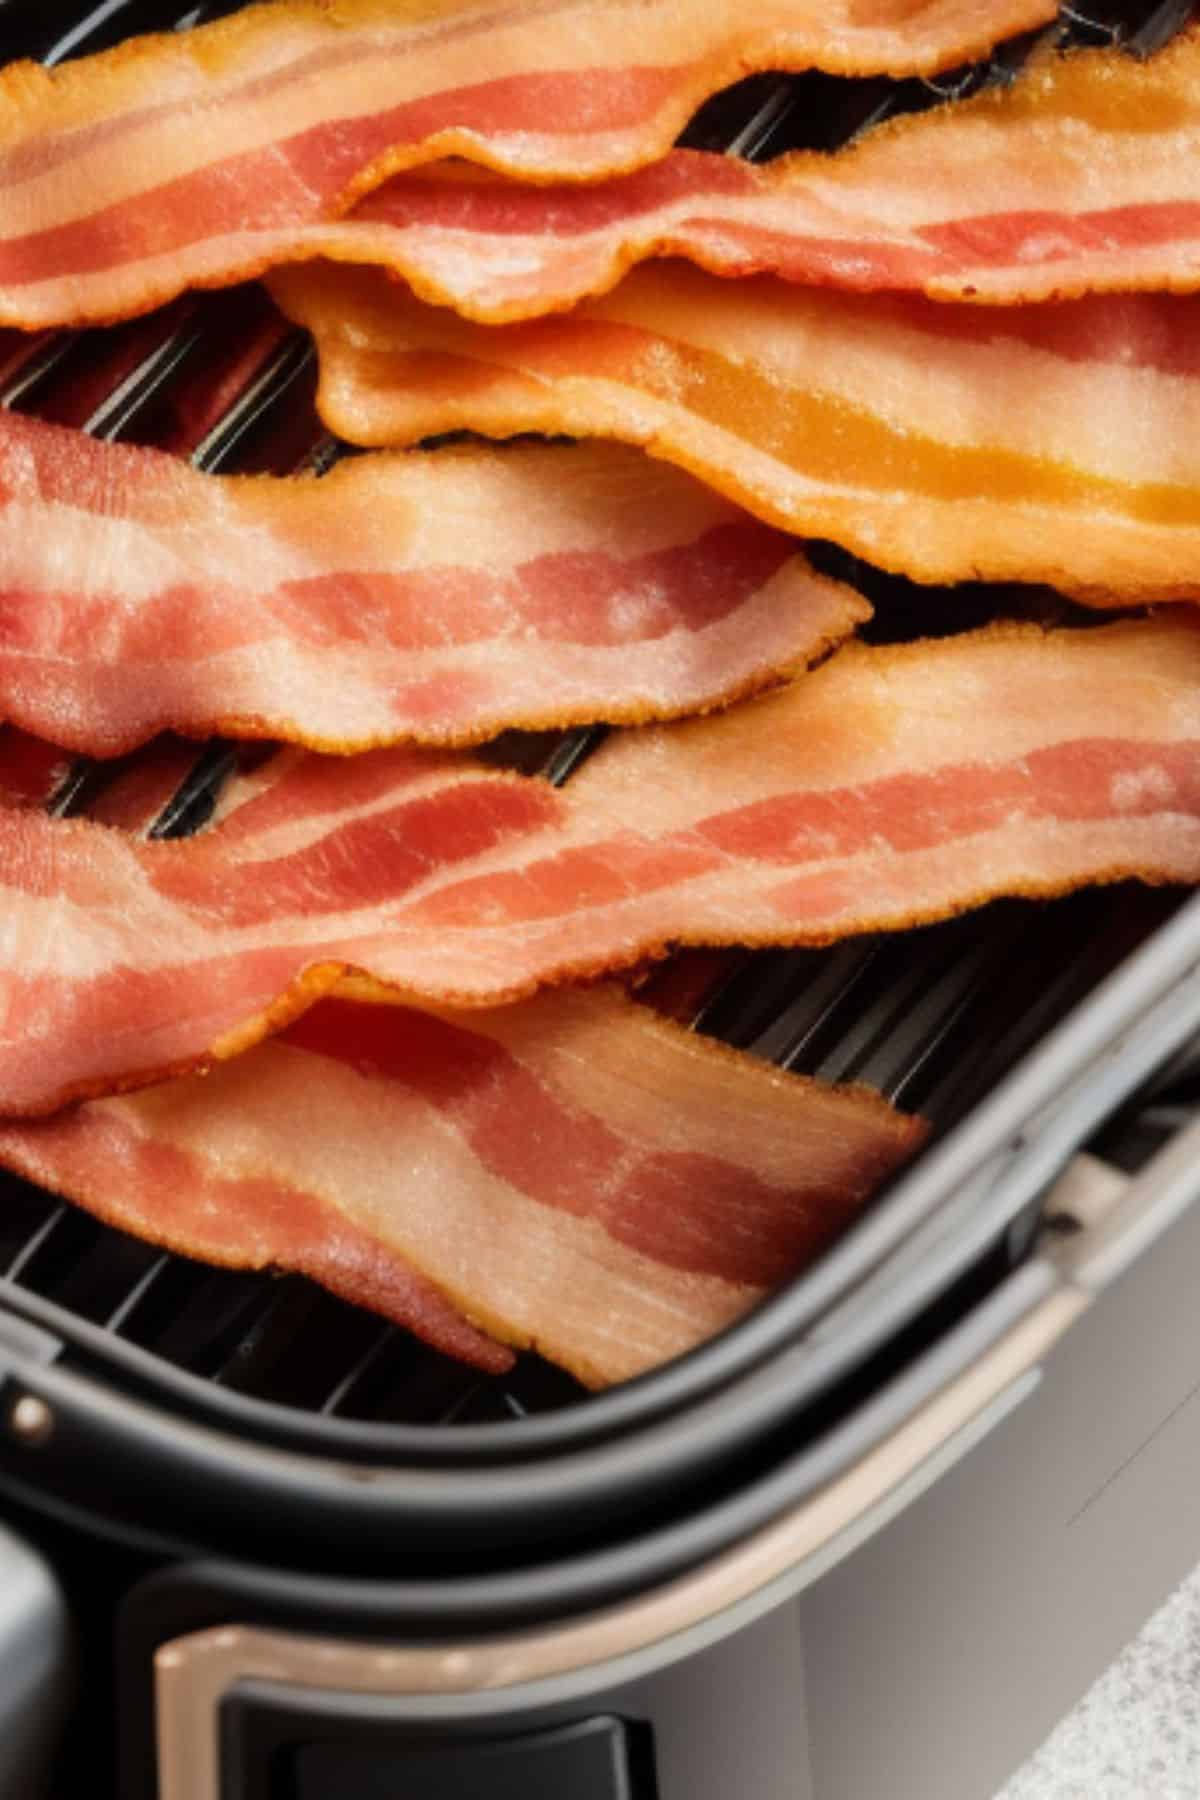 strips of cooked bacon in an air fryer basket.